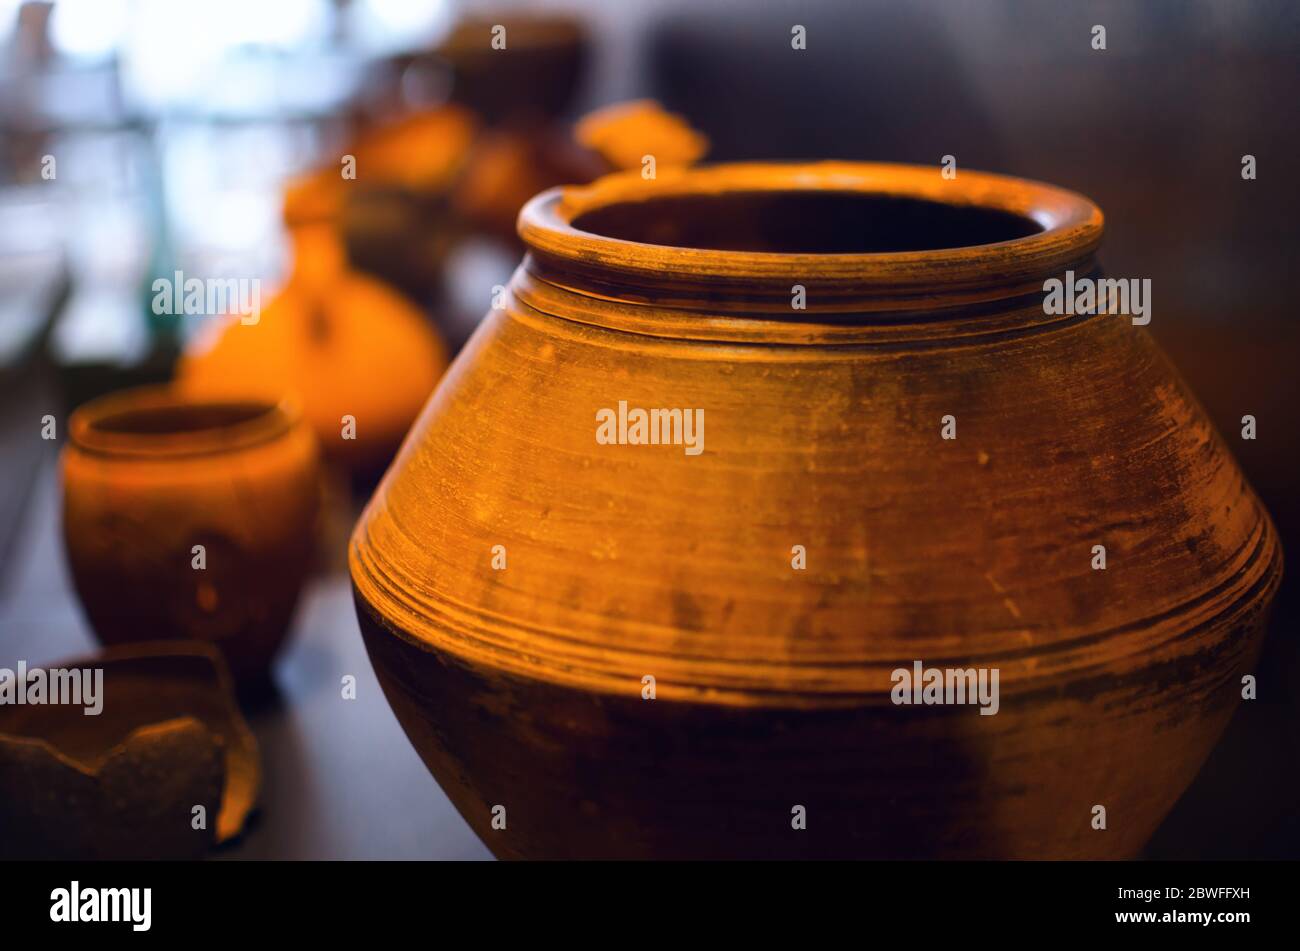 Ancient roman clay pottery and vases Stock Photo